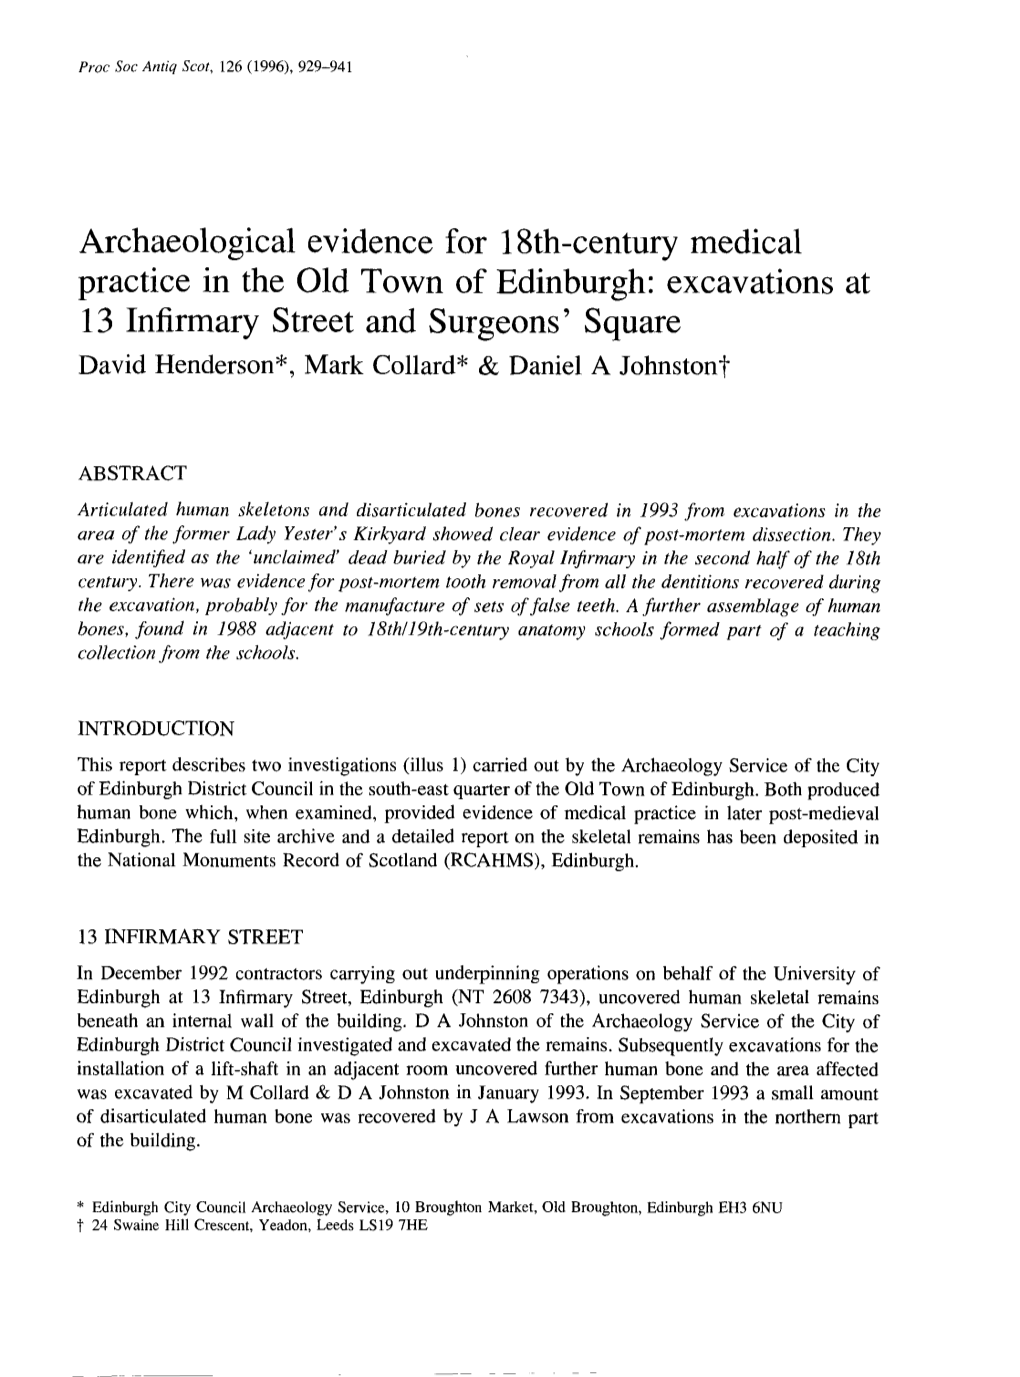 Archaeological Evidence for 18Th-Century Medical Practice in The